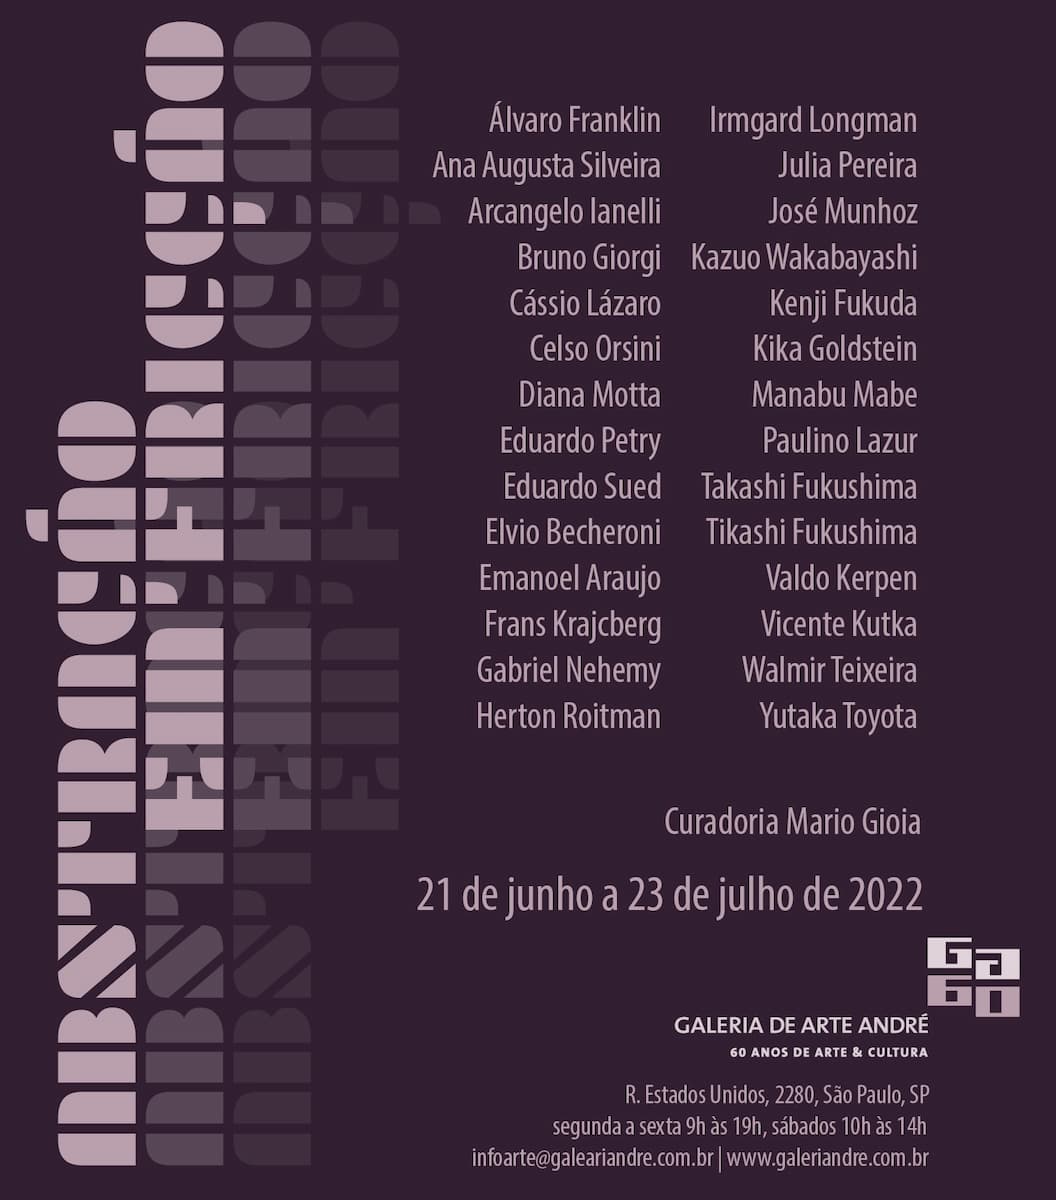 Exhibition "Abstraction in Friction" at the André Art Gallery. Disclosure.